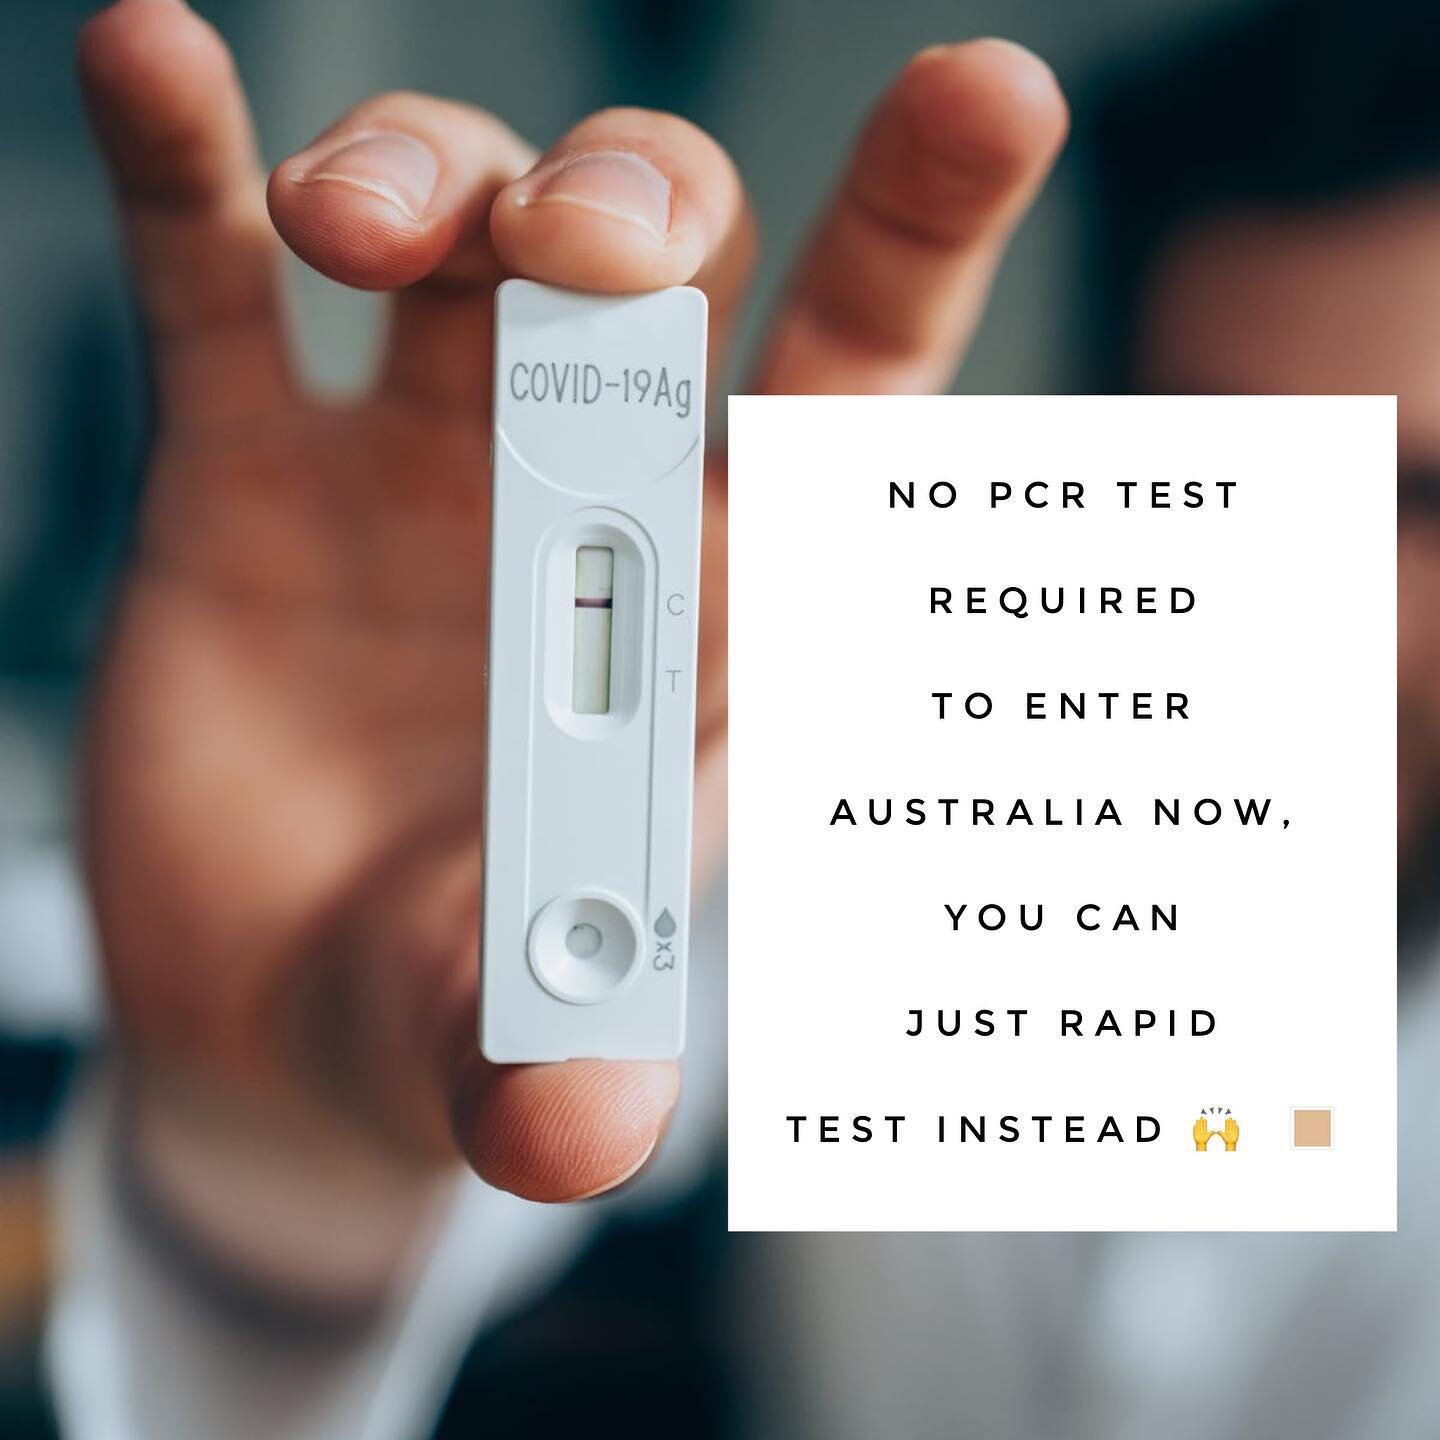 This is great news for travellers - you no longer need a negative PCR test to enter Australia, just a negative rapid test (taken under the supervision of a medical practitioner- eg. a pharmacist).
.
For further information, please go to:
https://www.